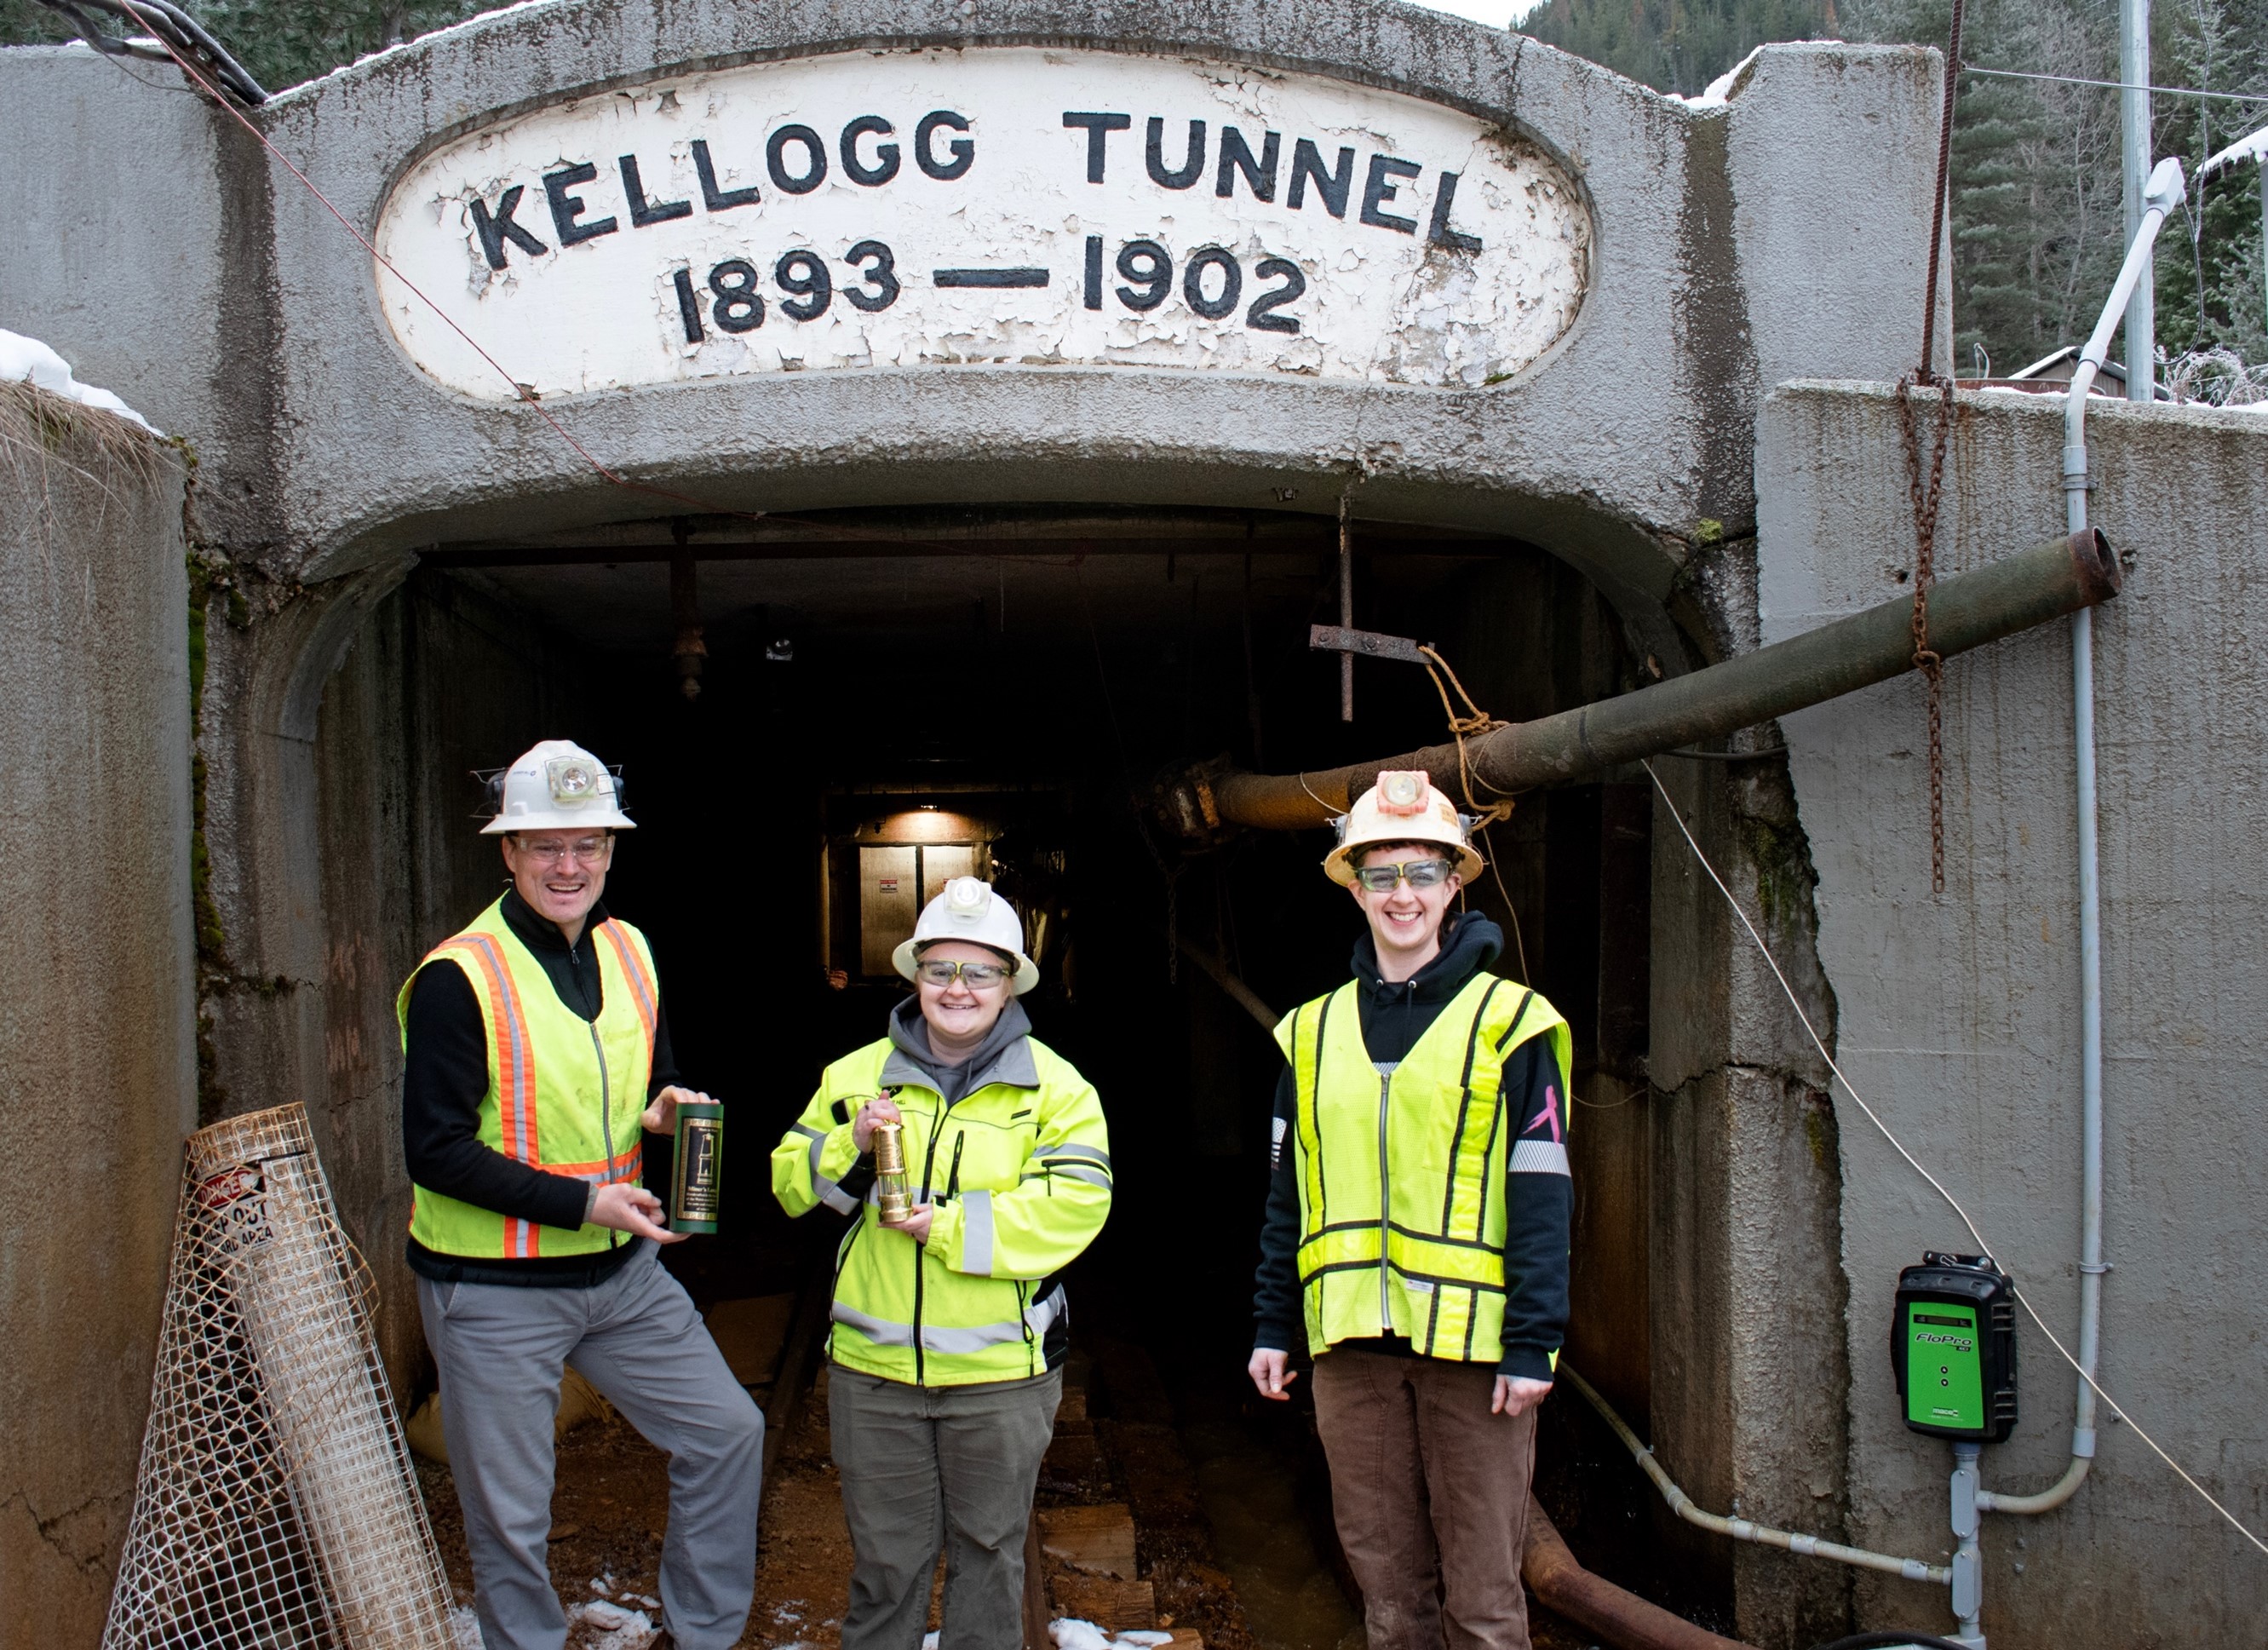 Bunker Hill’s General Manager Tom Francis, Environmental Manager Morgan Hill and Survey Technician Karen Ryan holding the award next to the water discharge monitoring station in the Kellogg Tunnel entrance.